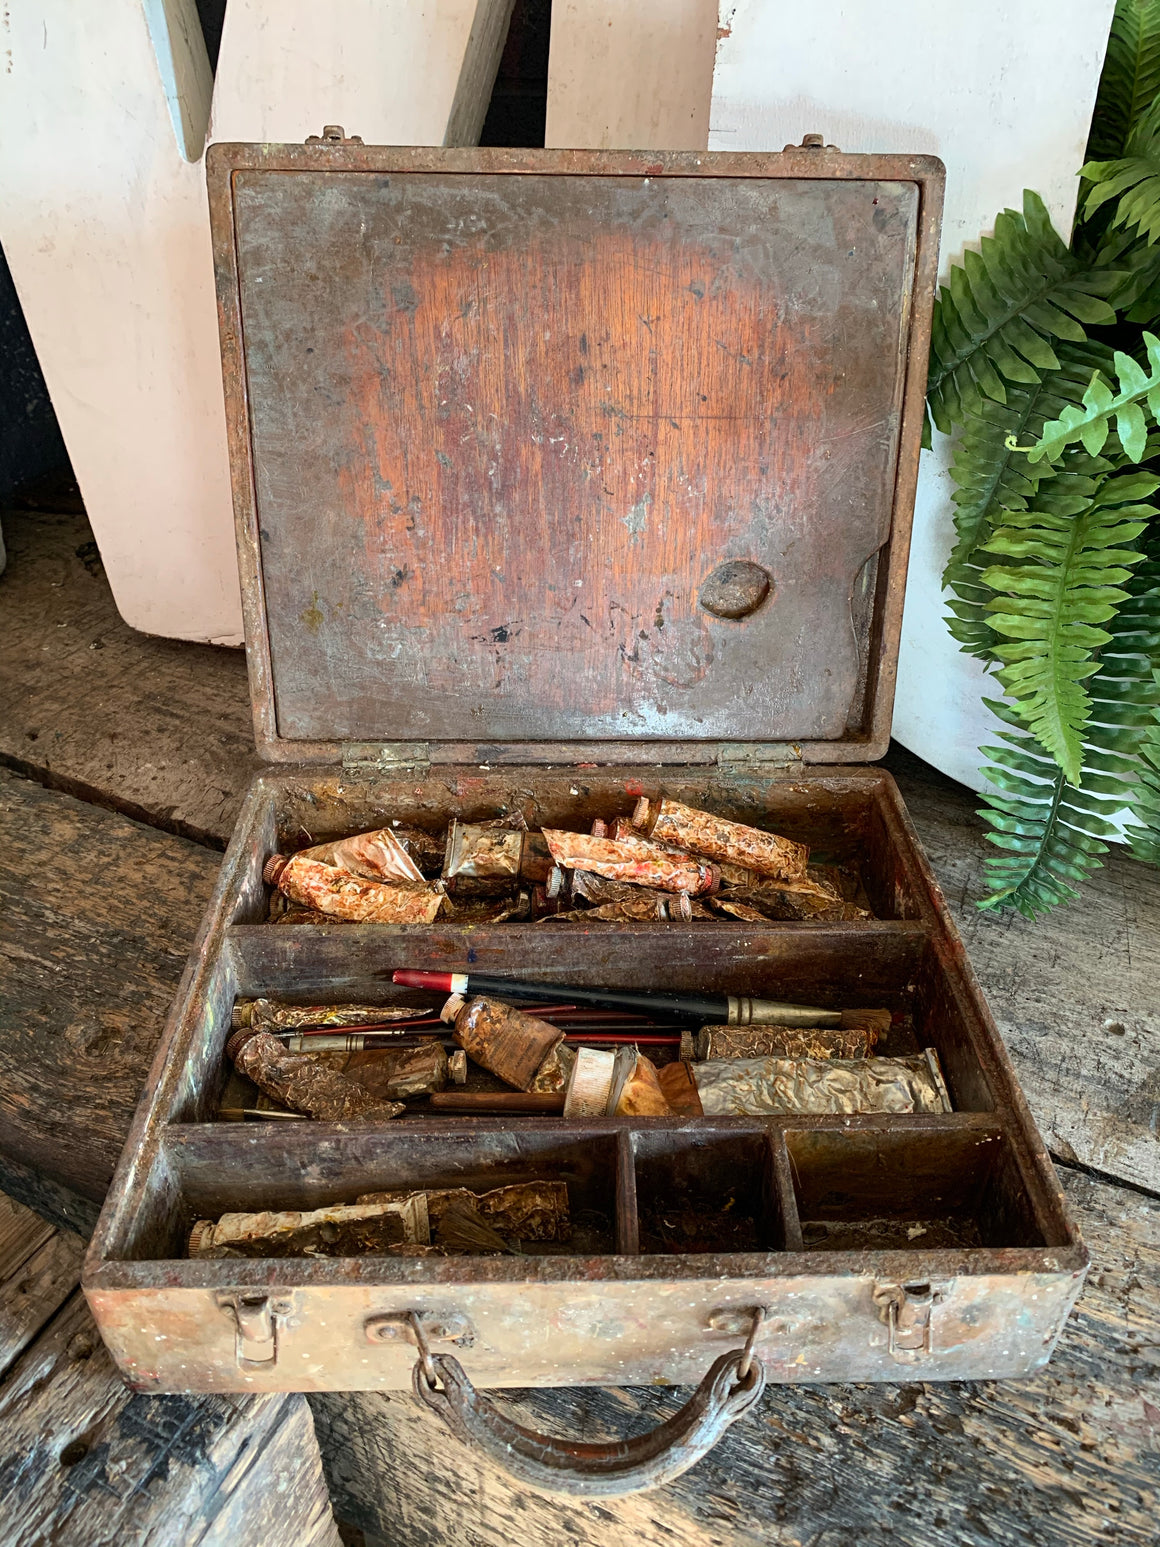 A wooden artist's box with palettes, brushes and paints by C. Roberson